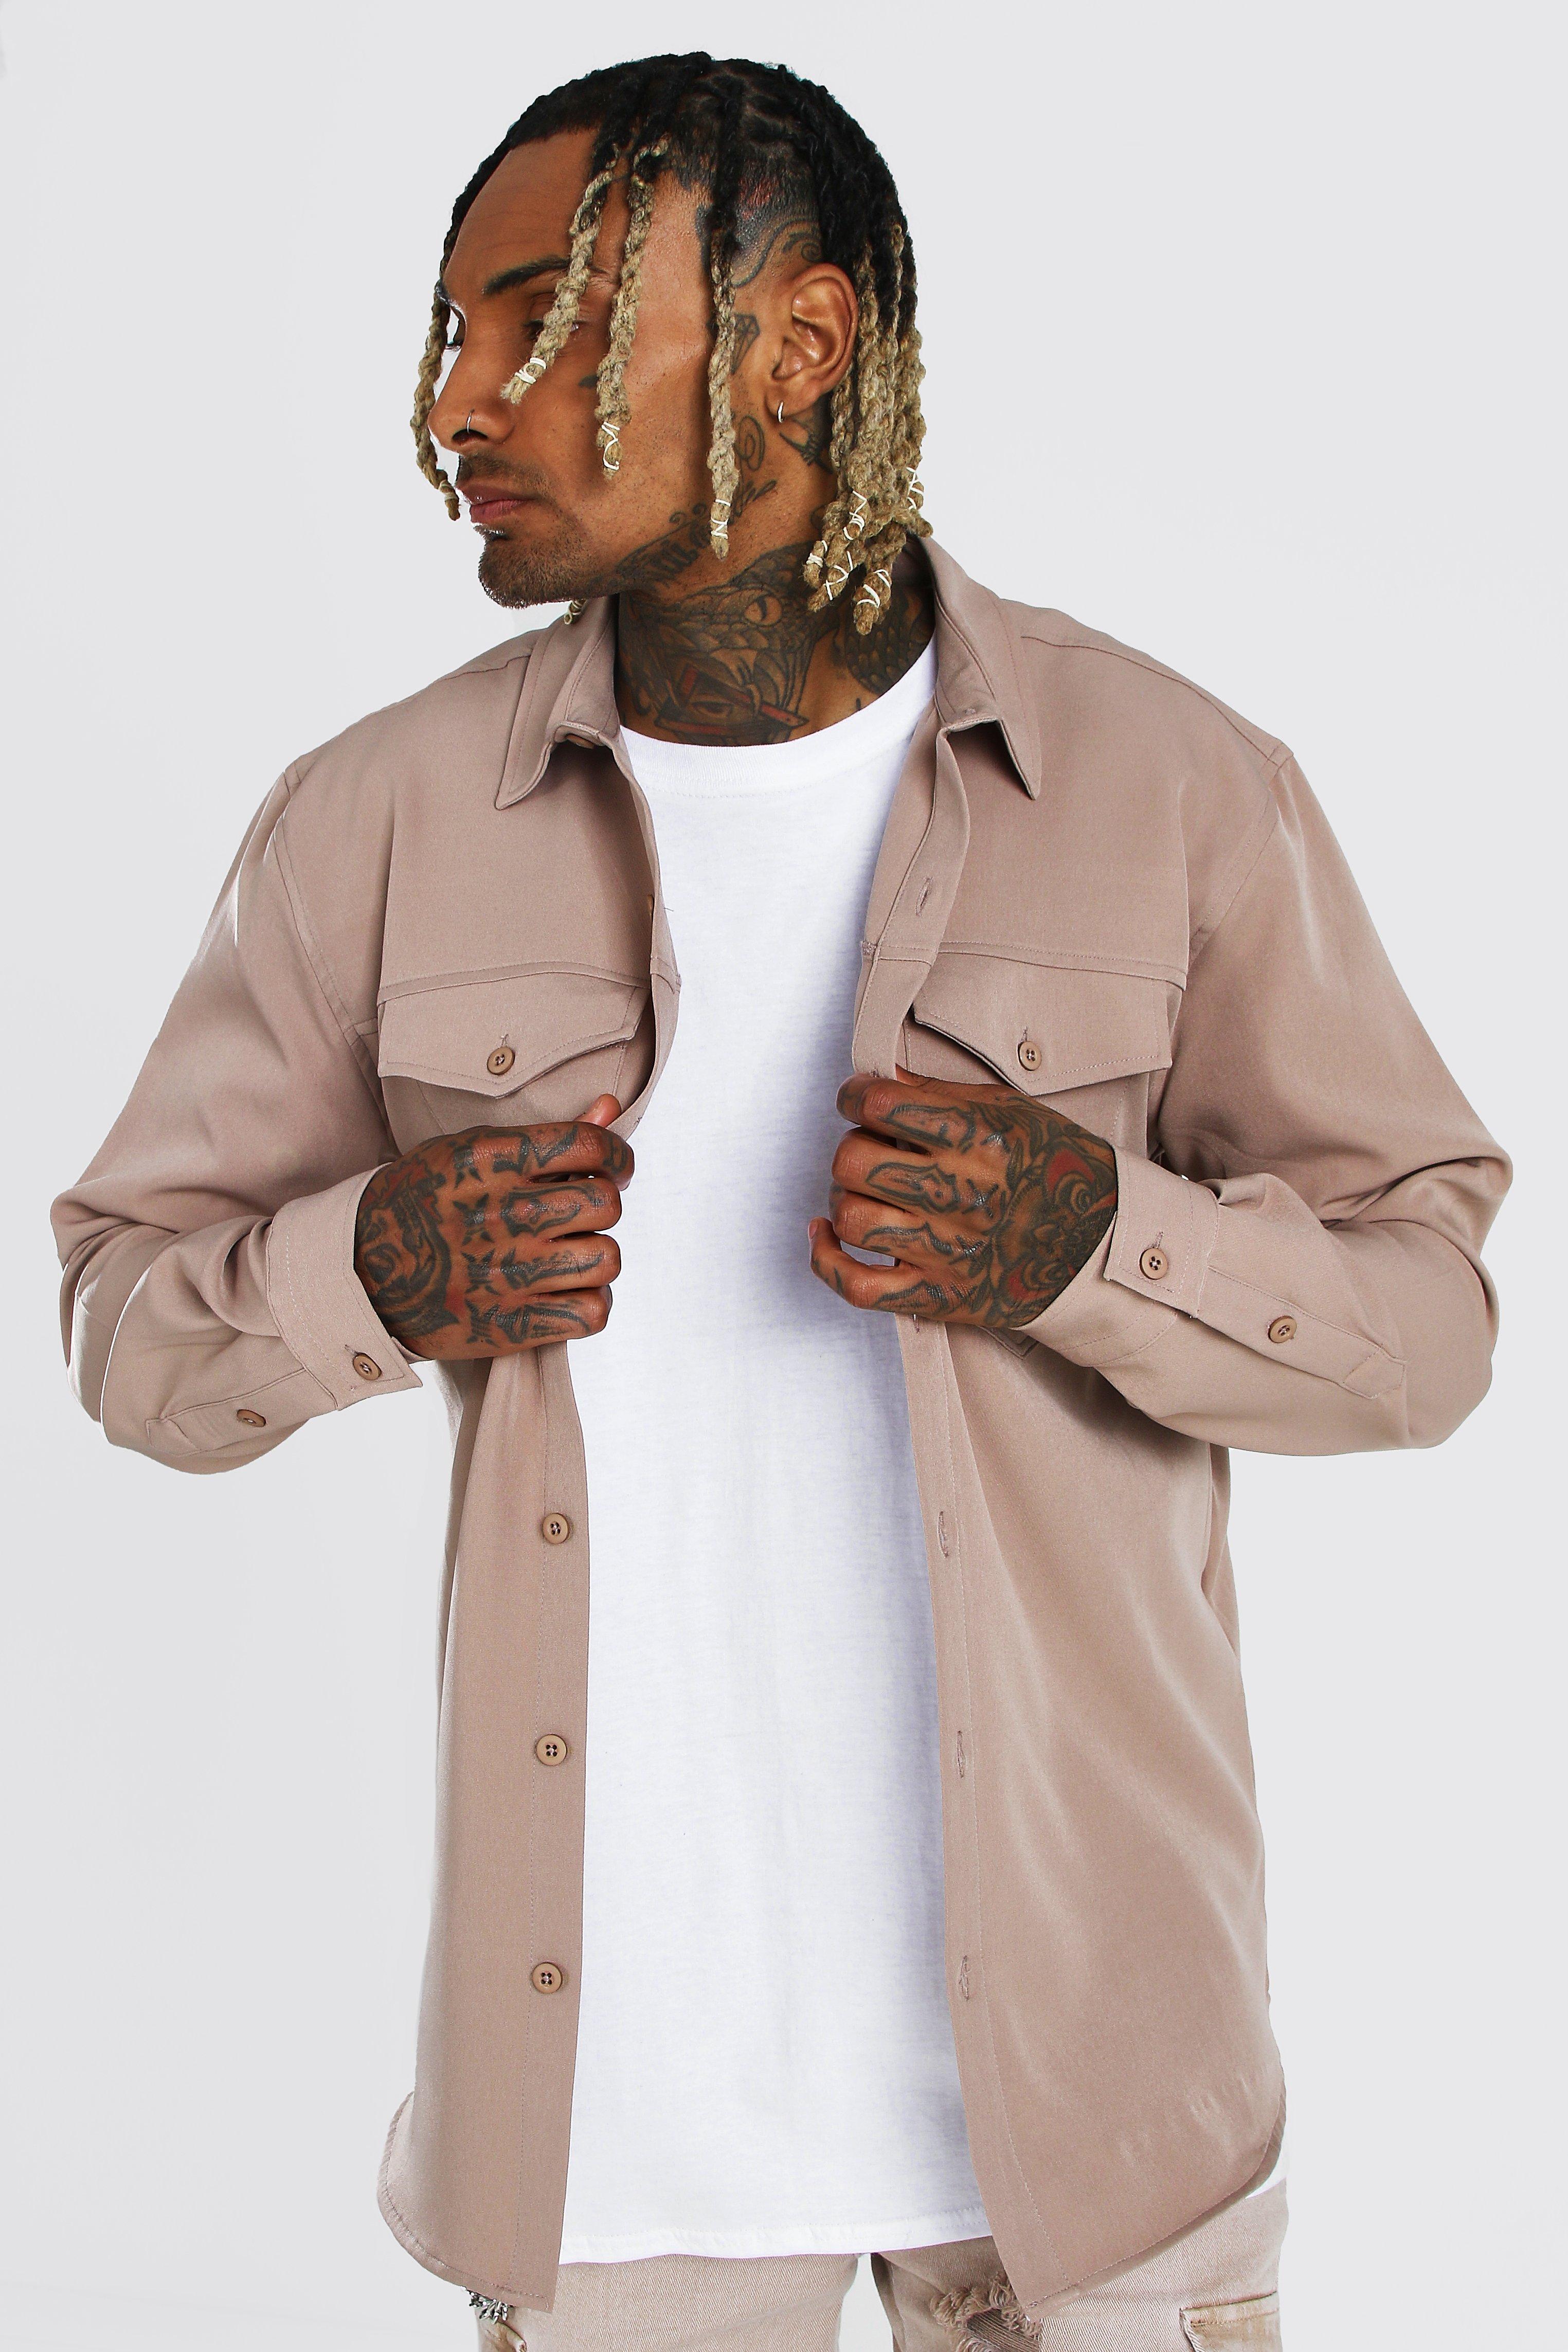 surchemise utilitaire chic homme - taupe - m, taupe